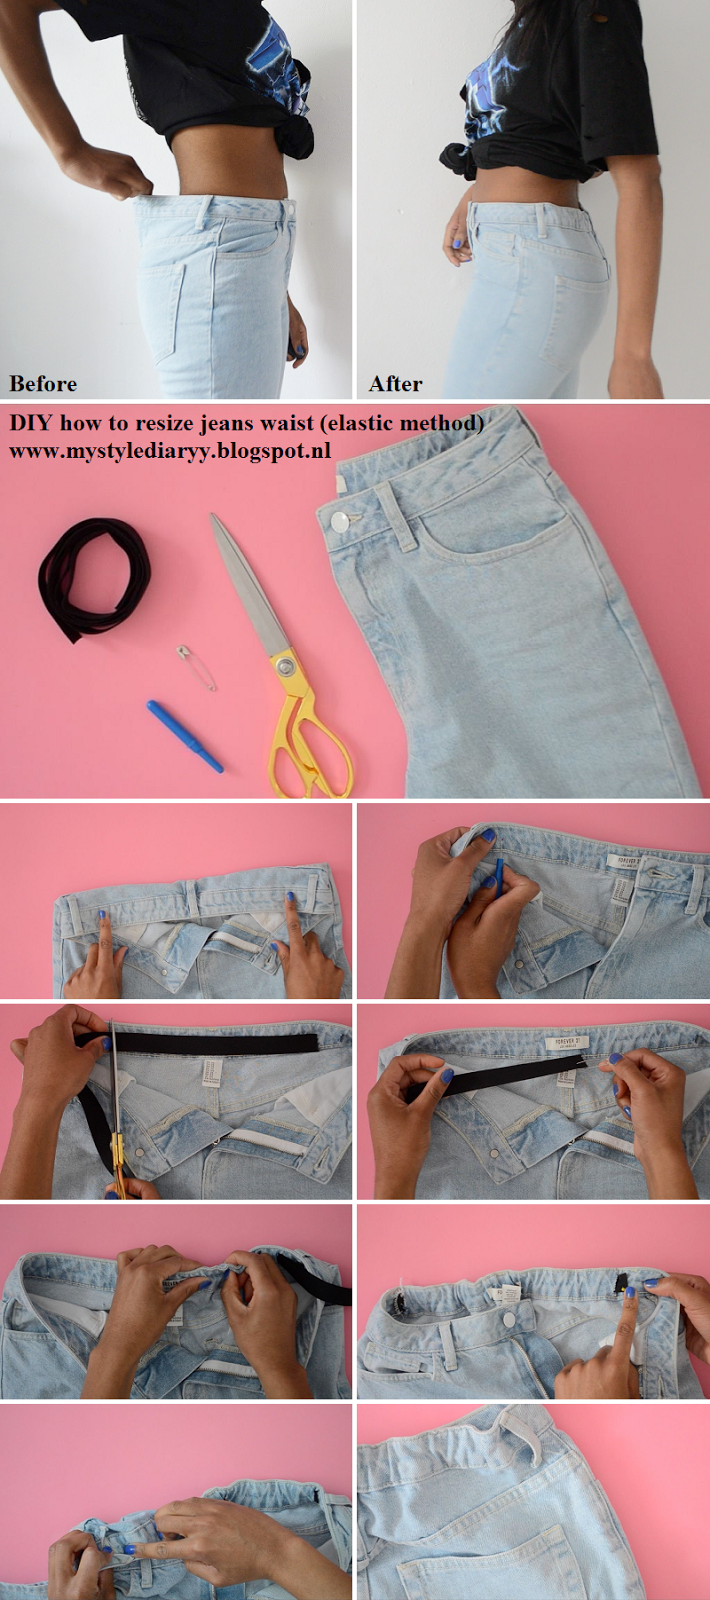 QUICK LIFE HACK HOW TO RESIZE YOUR JEANS WAIST | MYSTYLEDIARYY